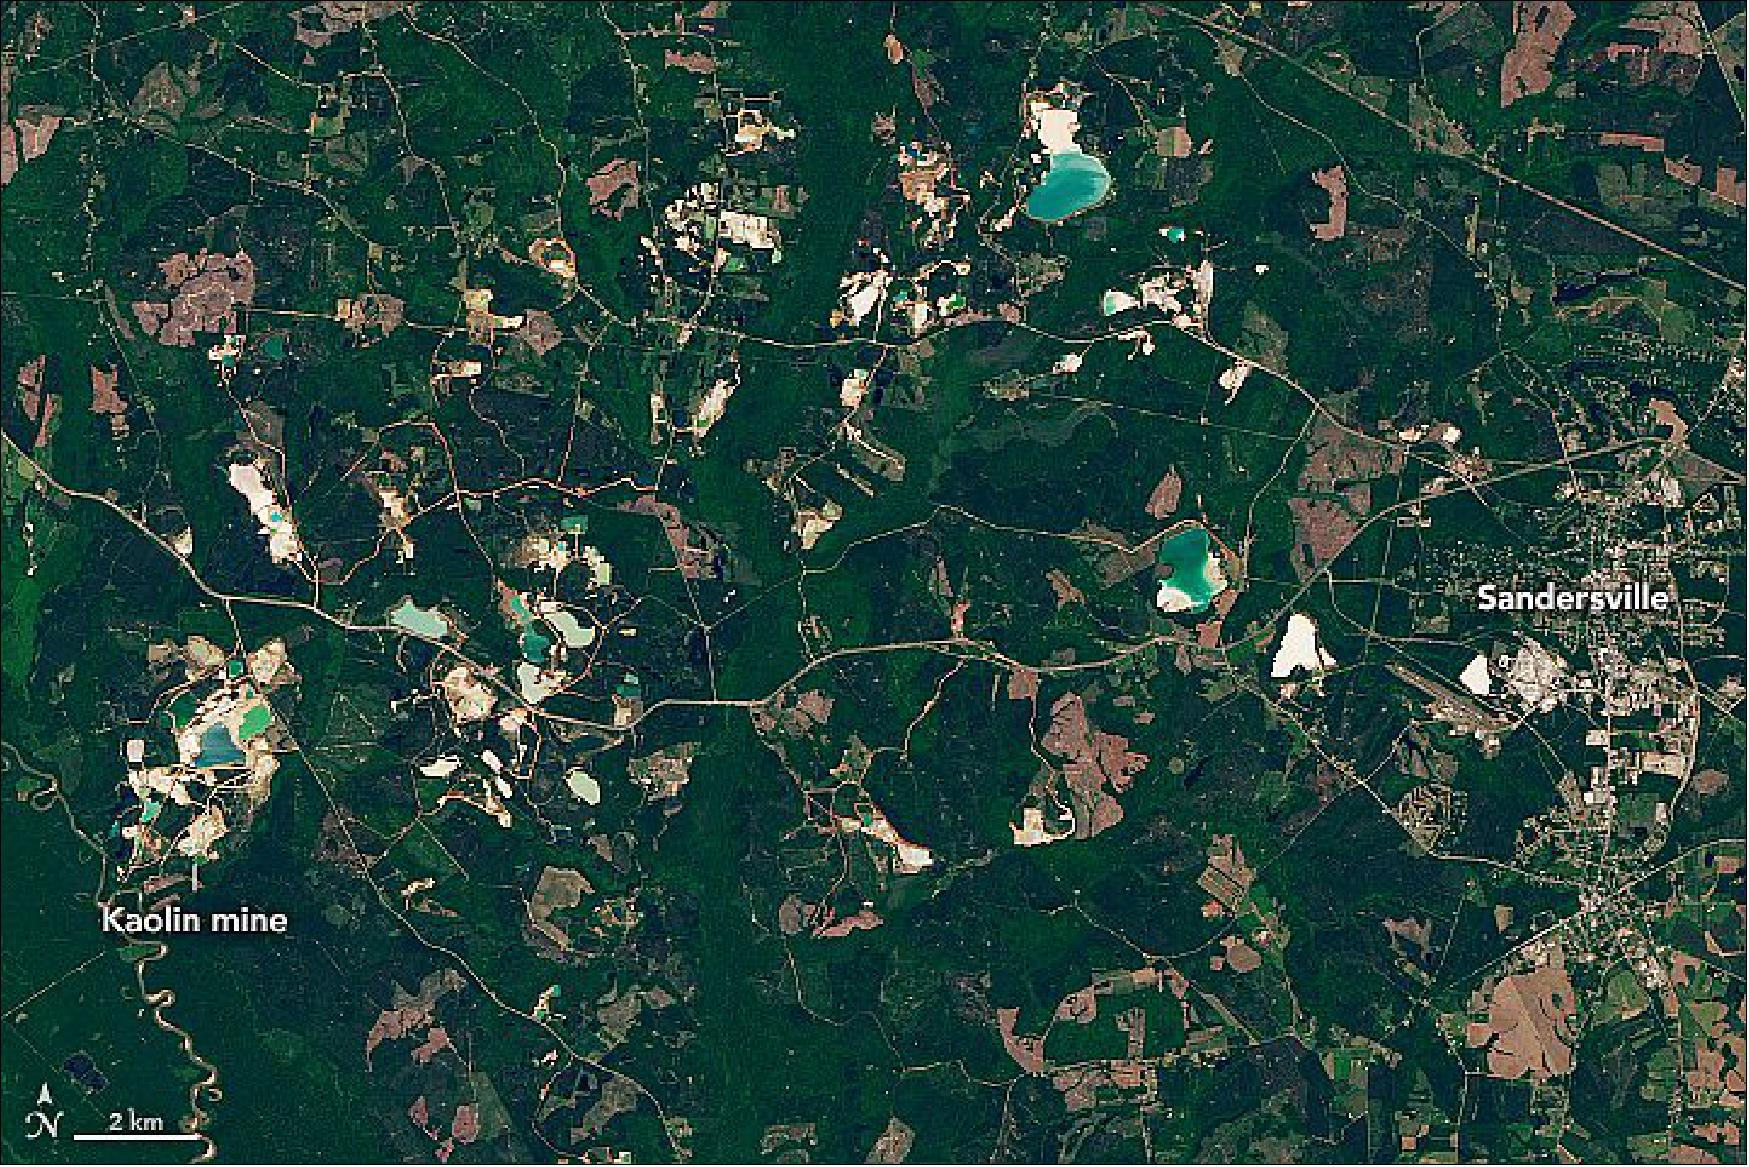 Figure 3: People have long extracted the soft clay from central Georgia for use in paper, ceramics, and other products. Signs of the industry are apparent in this natural-color satellite image, where mining pits appear white. Rain has collected in many of the pits, forming ponds with a crystal blue color. Some of the forested areas around the active pits were mined in previous decades but have since been replanted with trees and other vegetation. The Operational Land Imager (OLI) on Landsat-8 captured this image on April 13, 2020 (image credit: NASA Earth Observatory image by Lauren Dauphin, using Landsat data from the U.S. Geological Survey. Story by Adam Voiland)